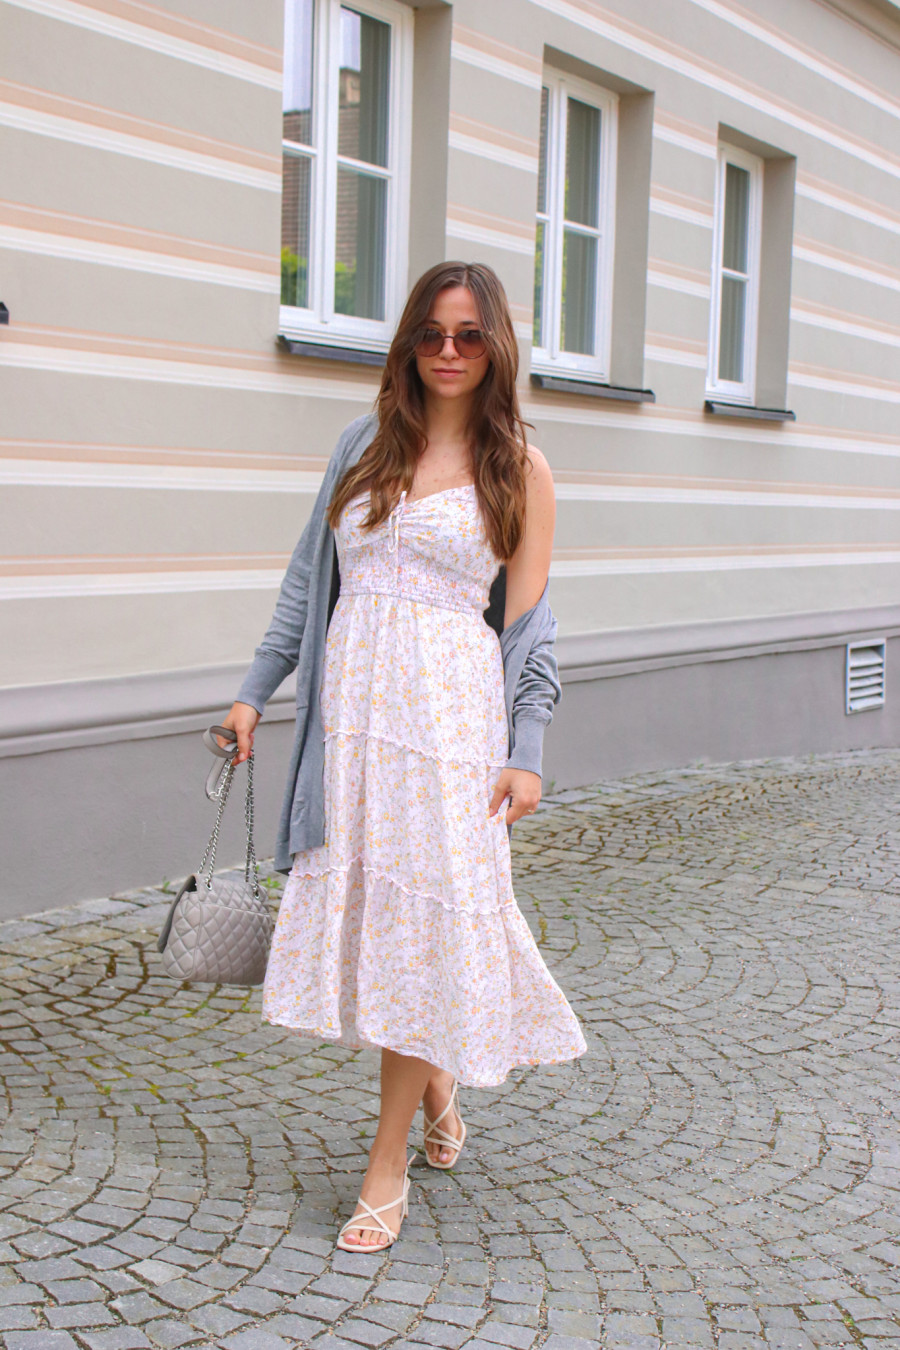 Was ziehe ich heute an- Sommer Outfits? 5 Outfit Ideen für den Sommer1